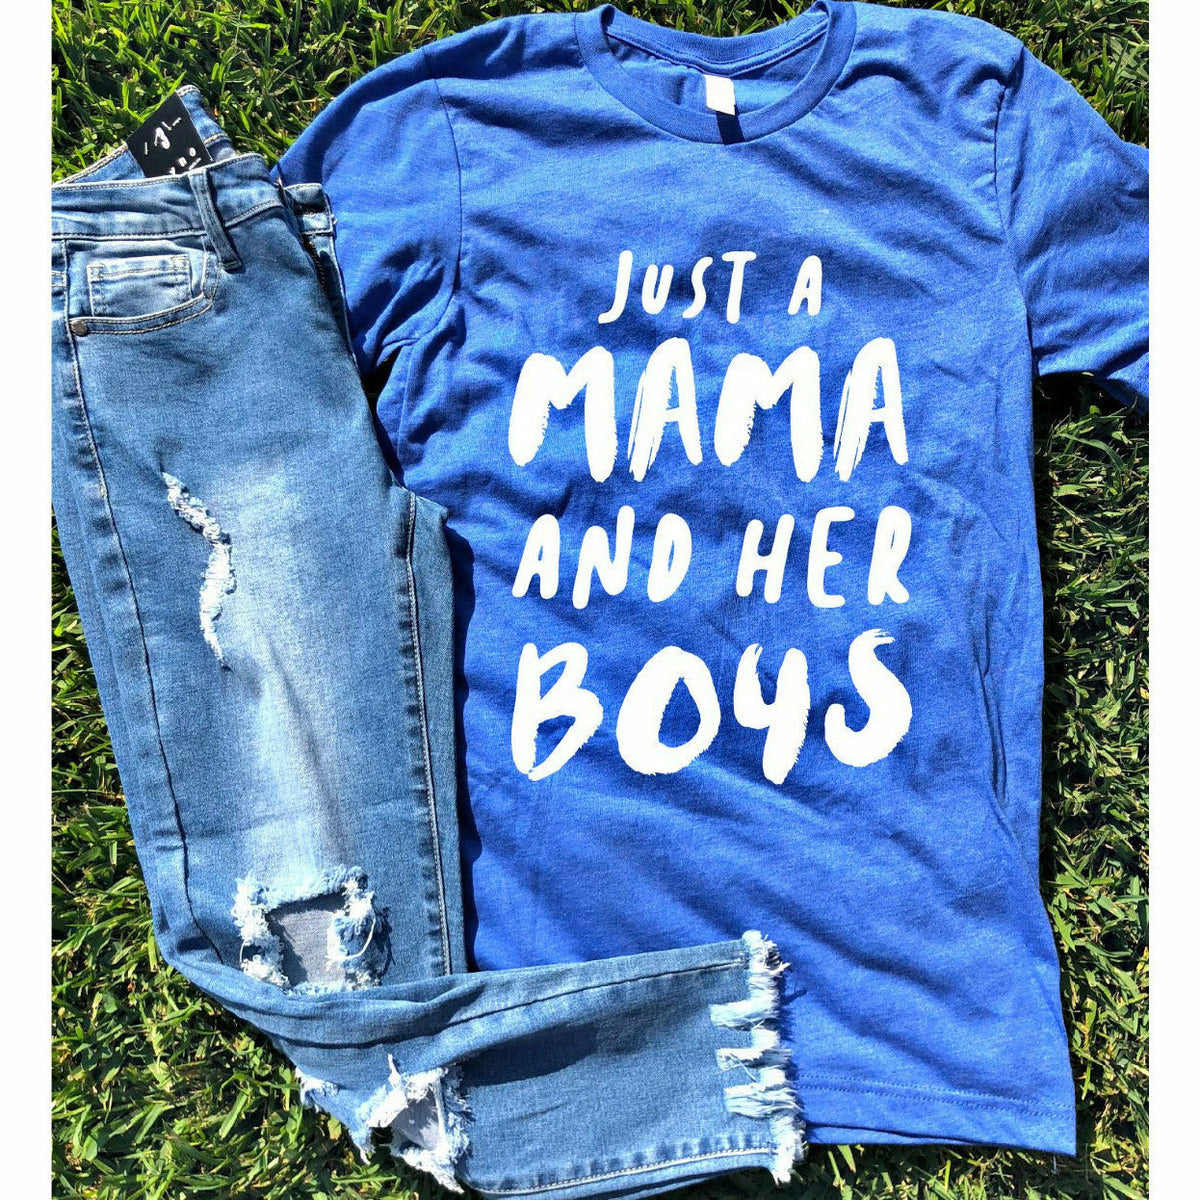 Just a Mama and her Boys tee